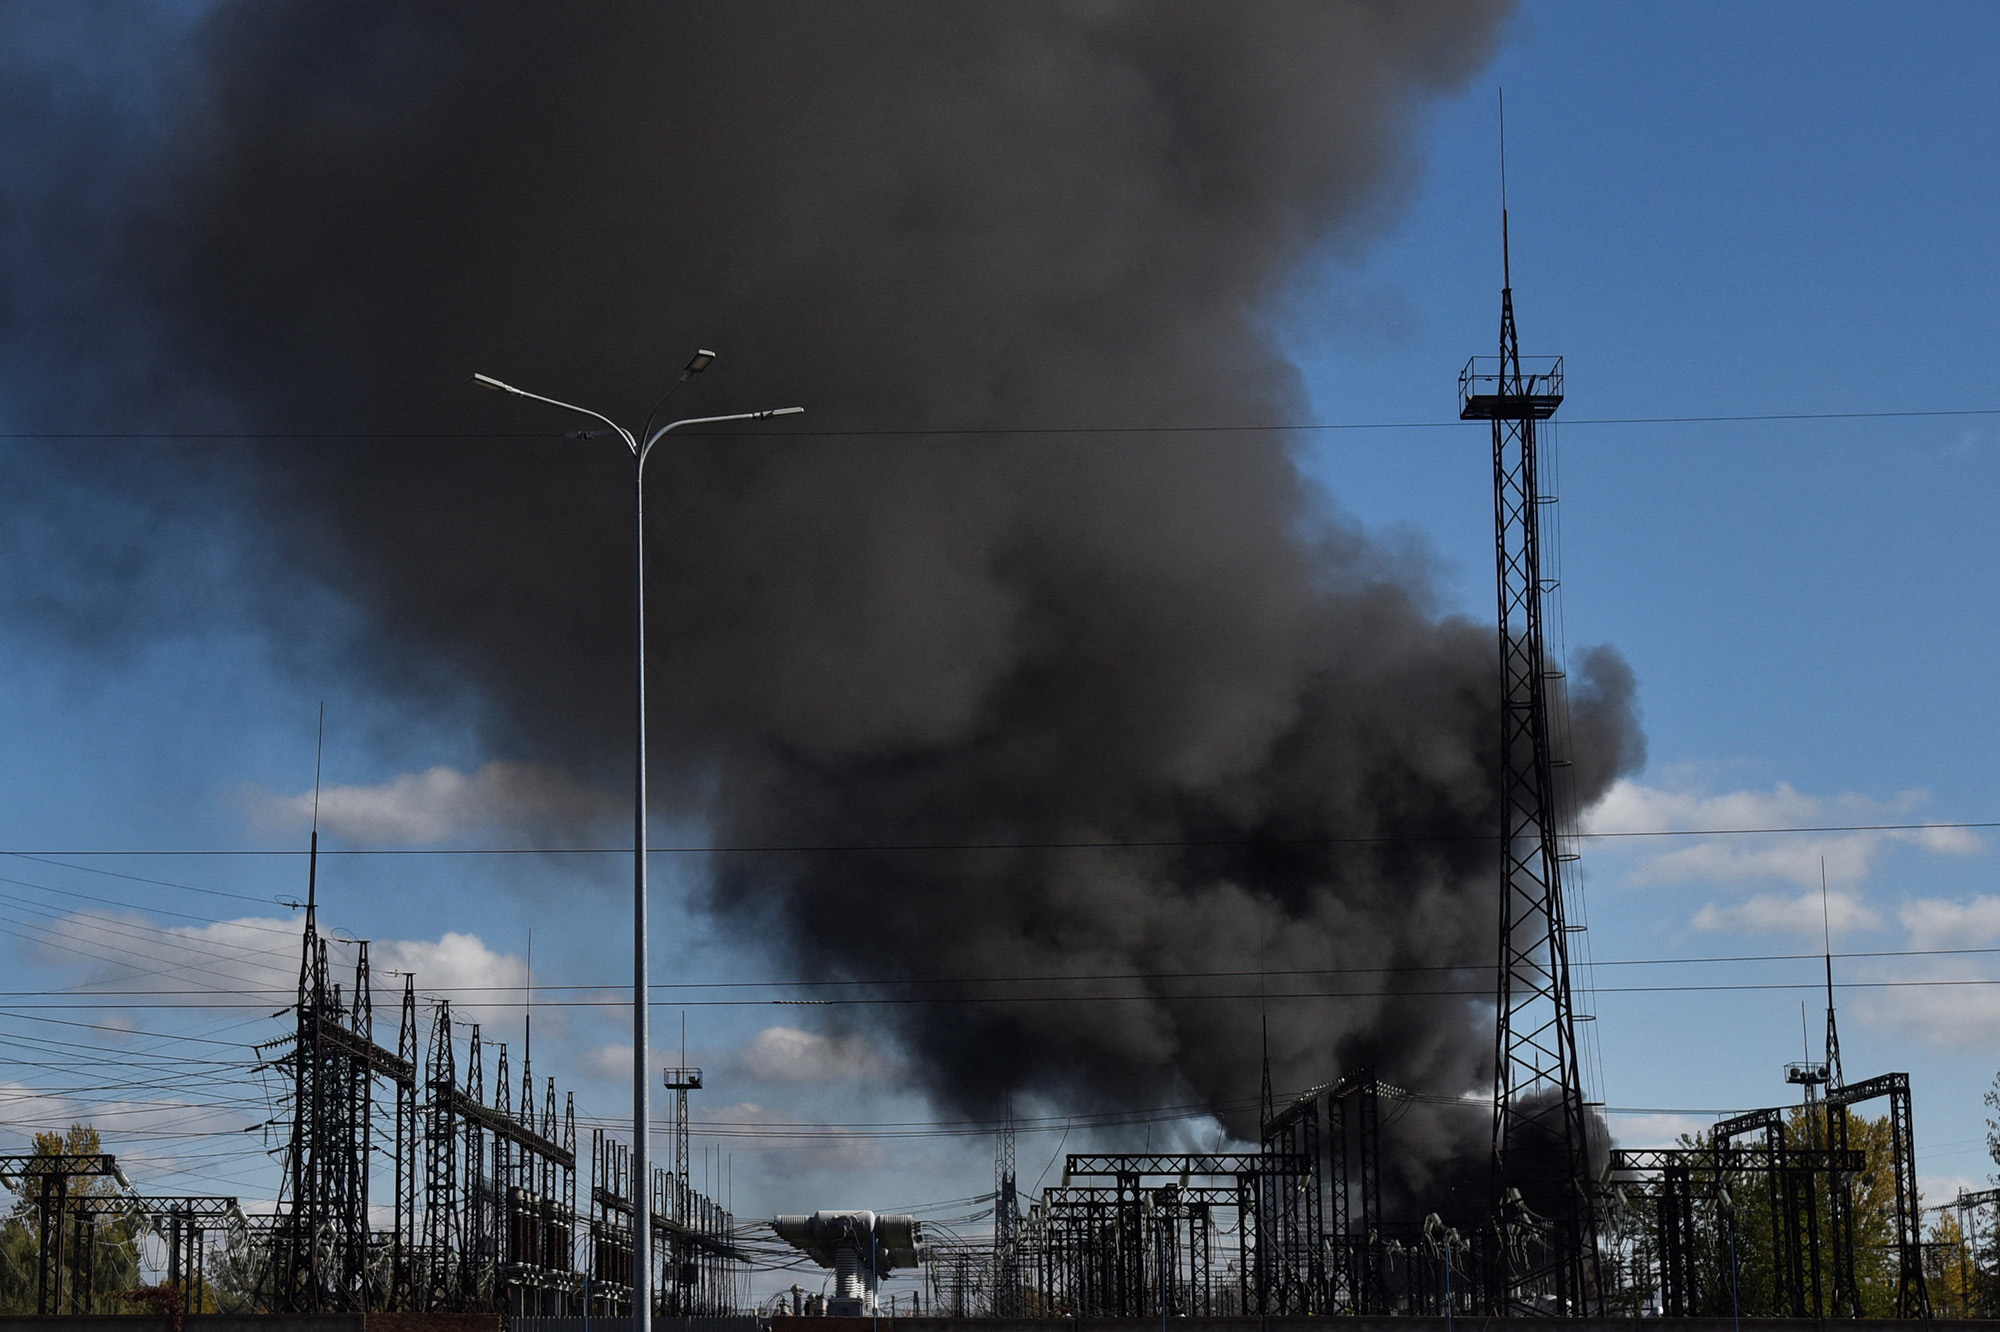 Smoke rises over power lines after Russian missile strikes in Lviv, Ukraine, on October 10.